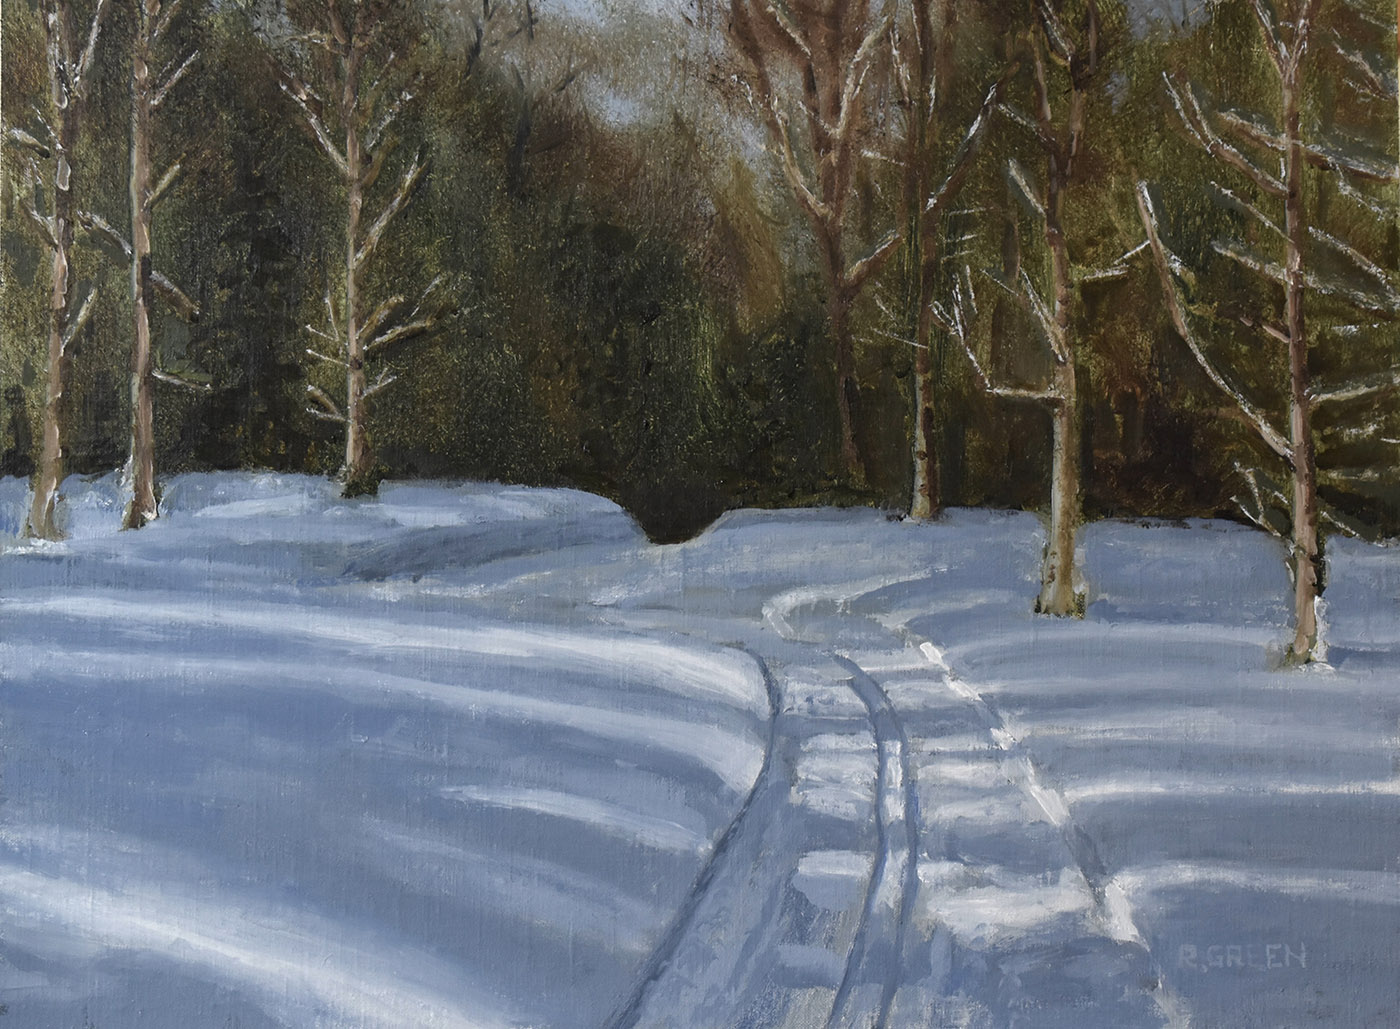 oil painting of snow cover road with forest in the distance- road leading the viewer into the woods